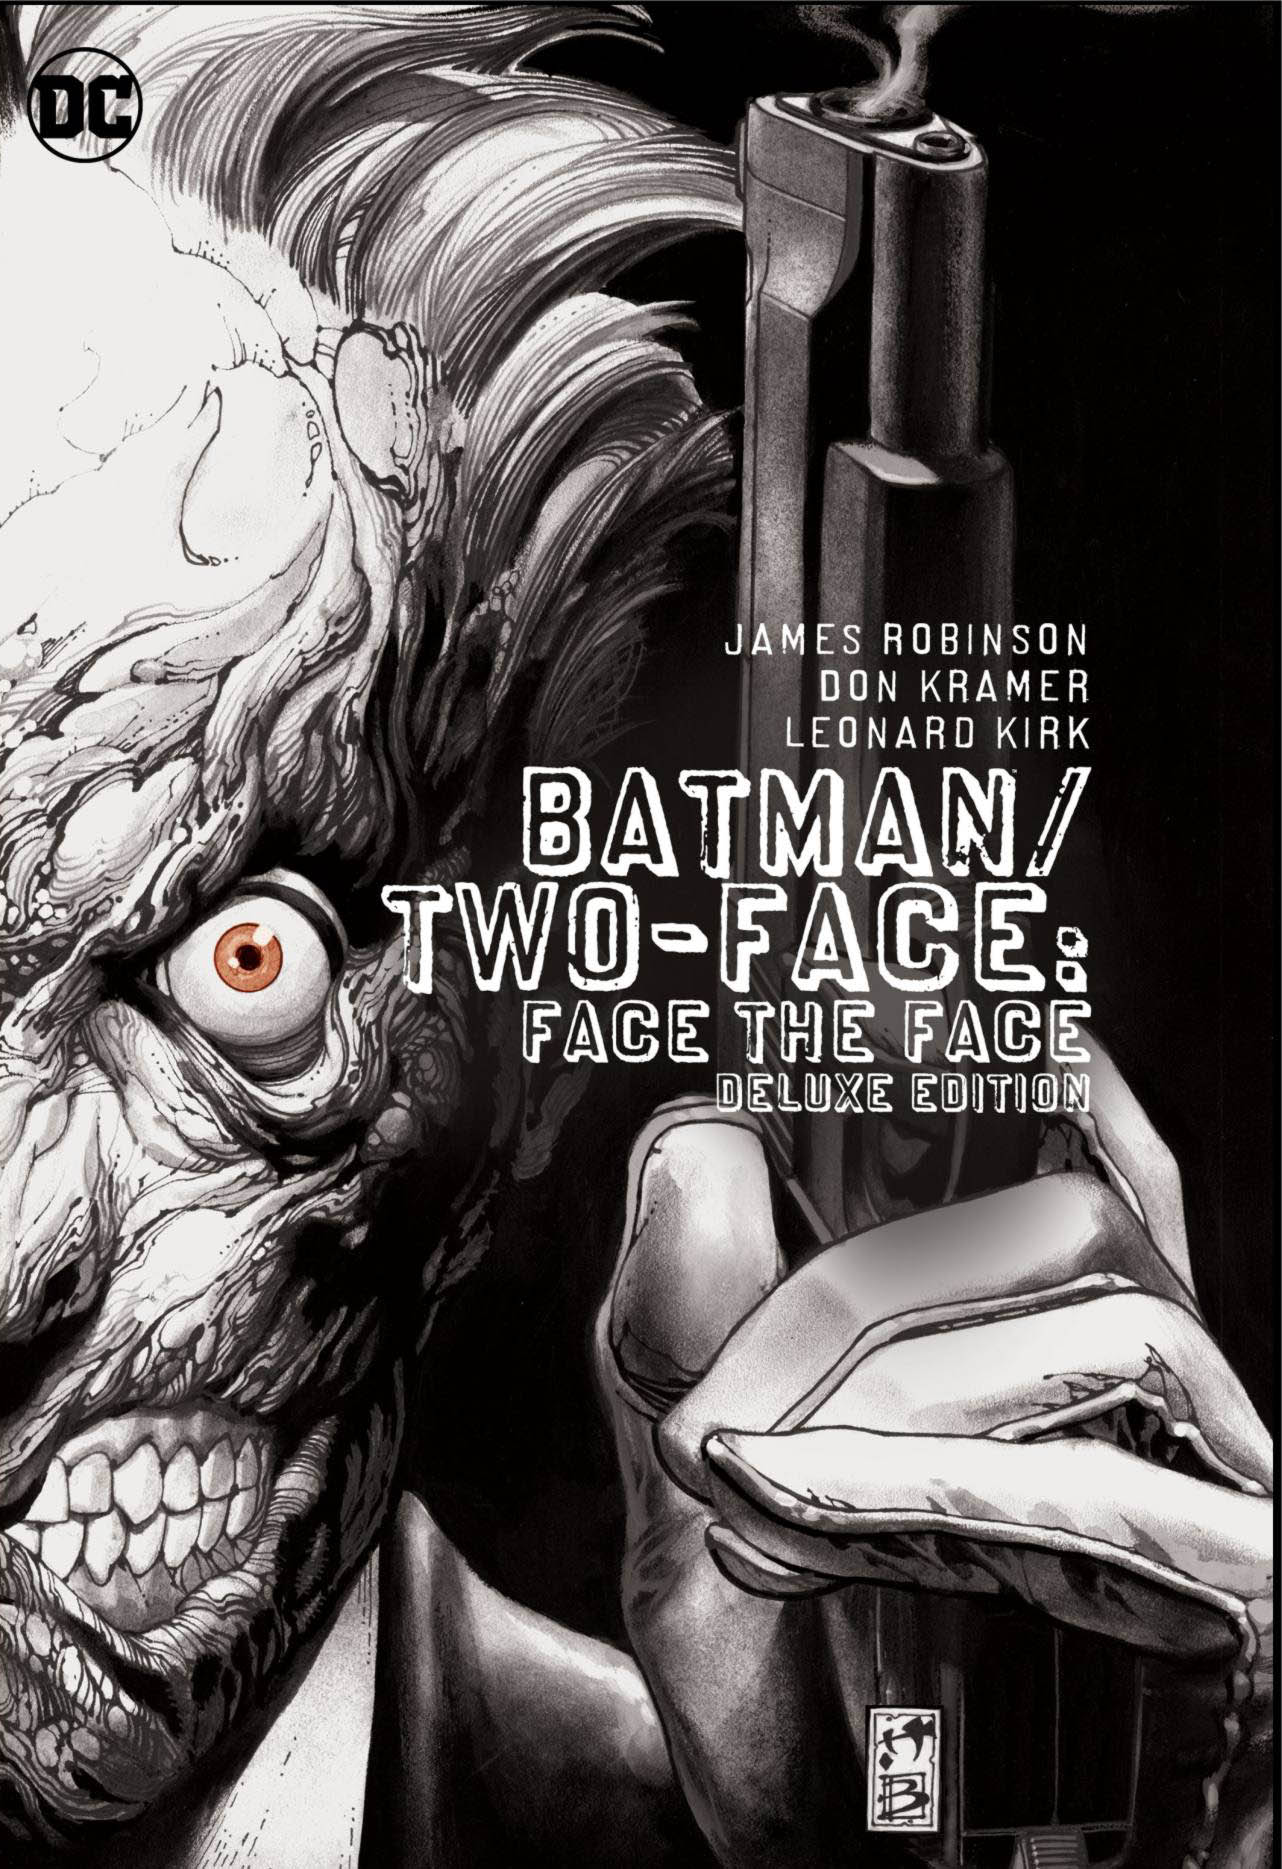 the dark knight two face poster